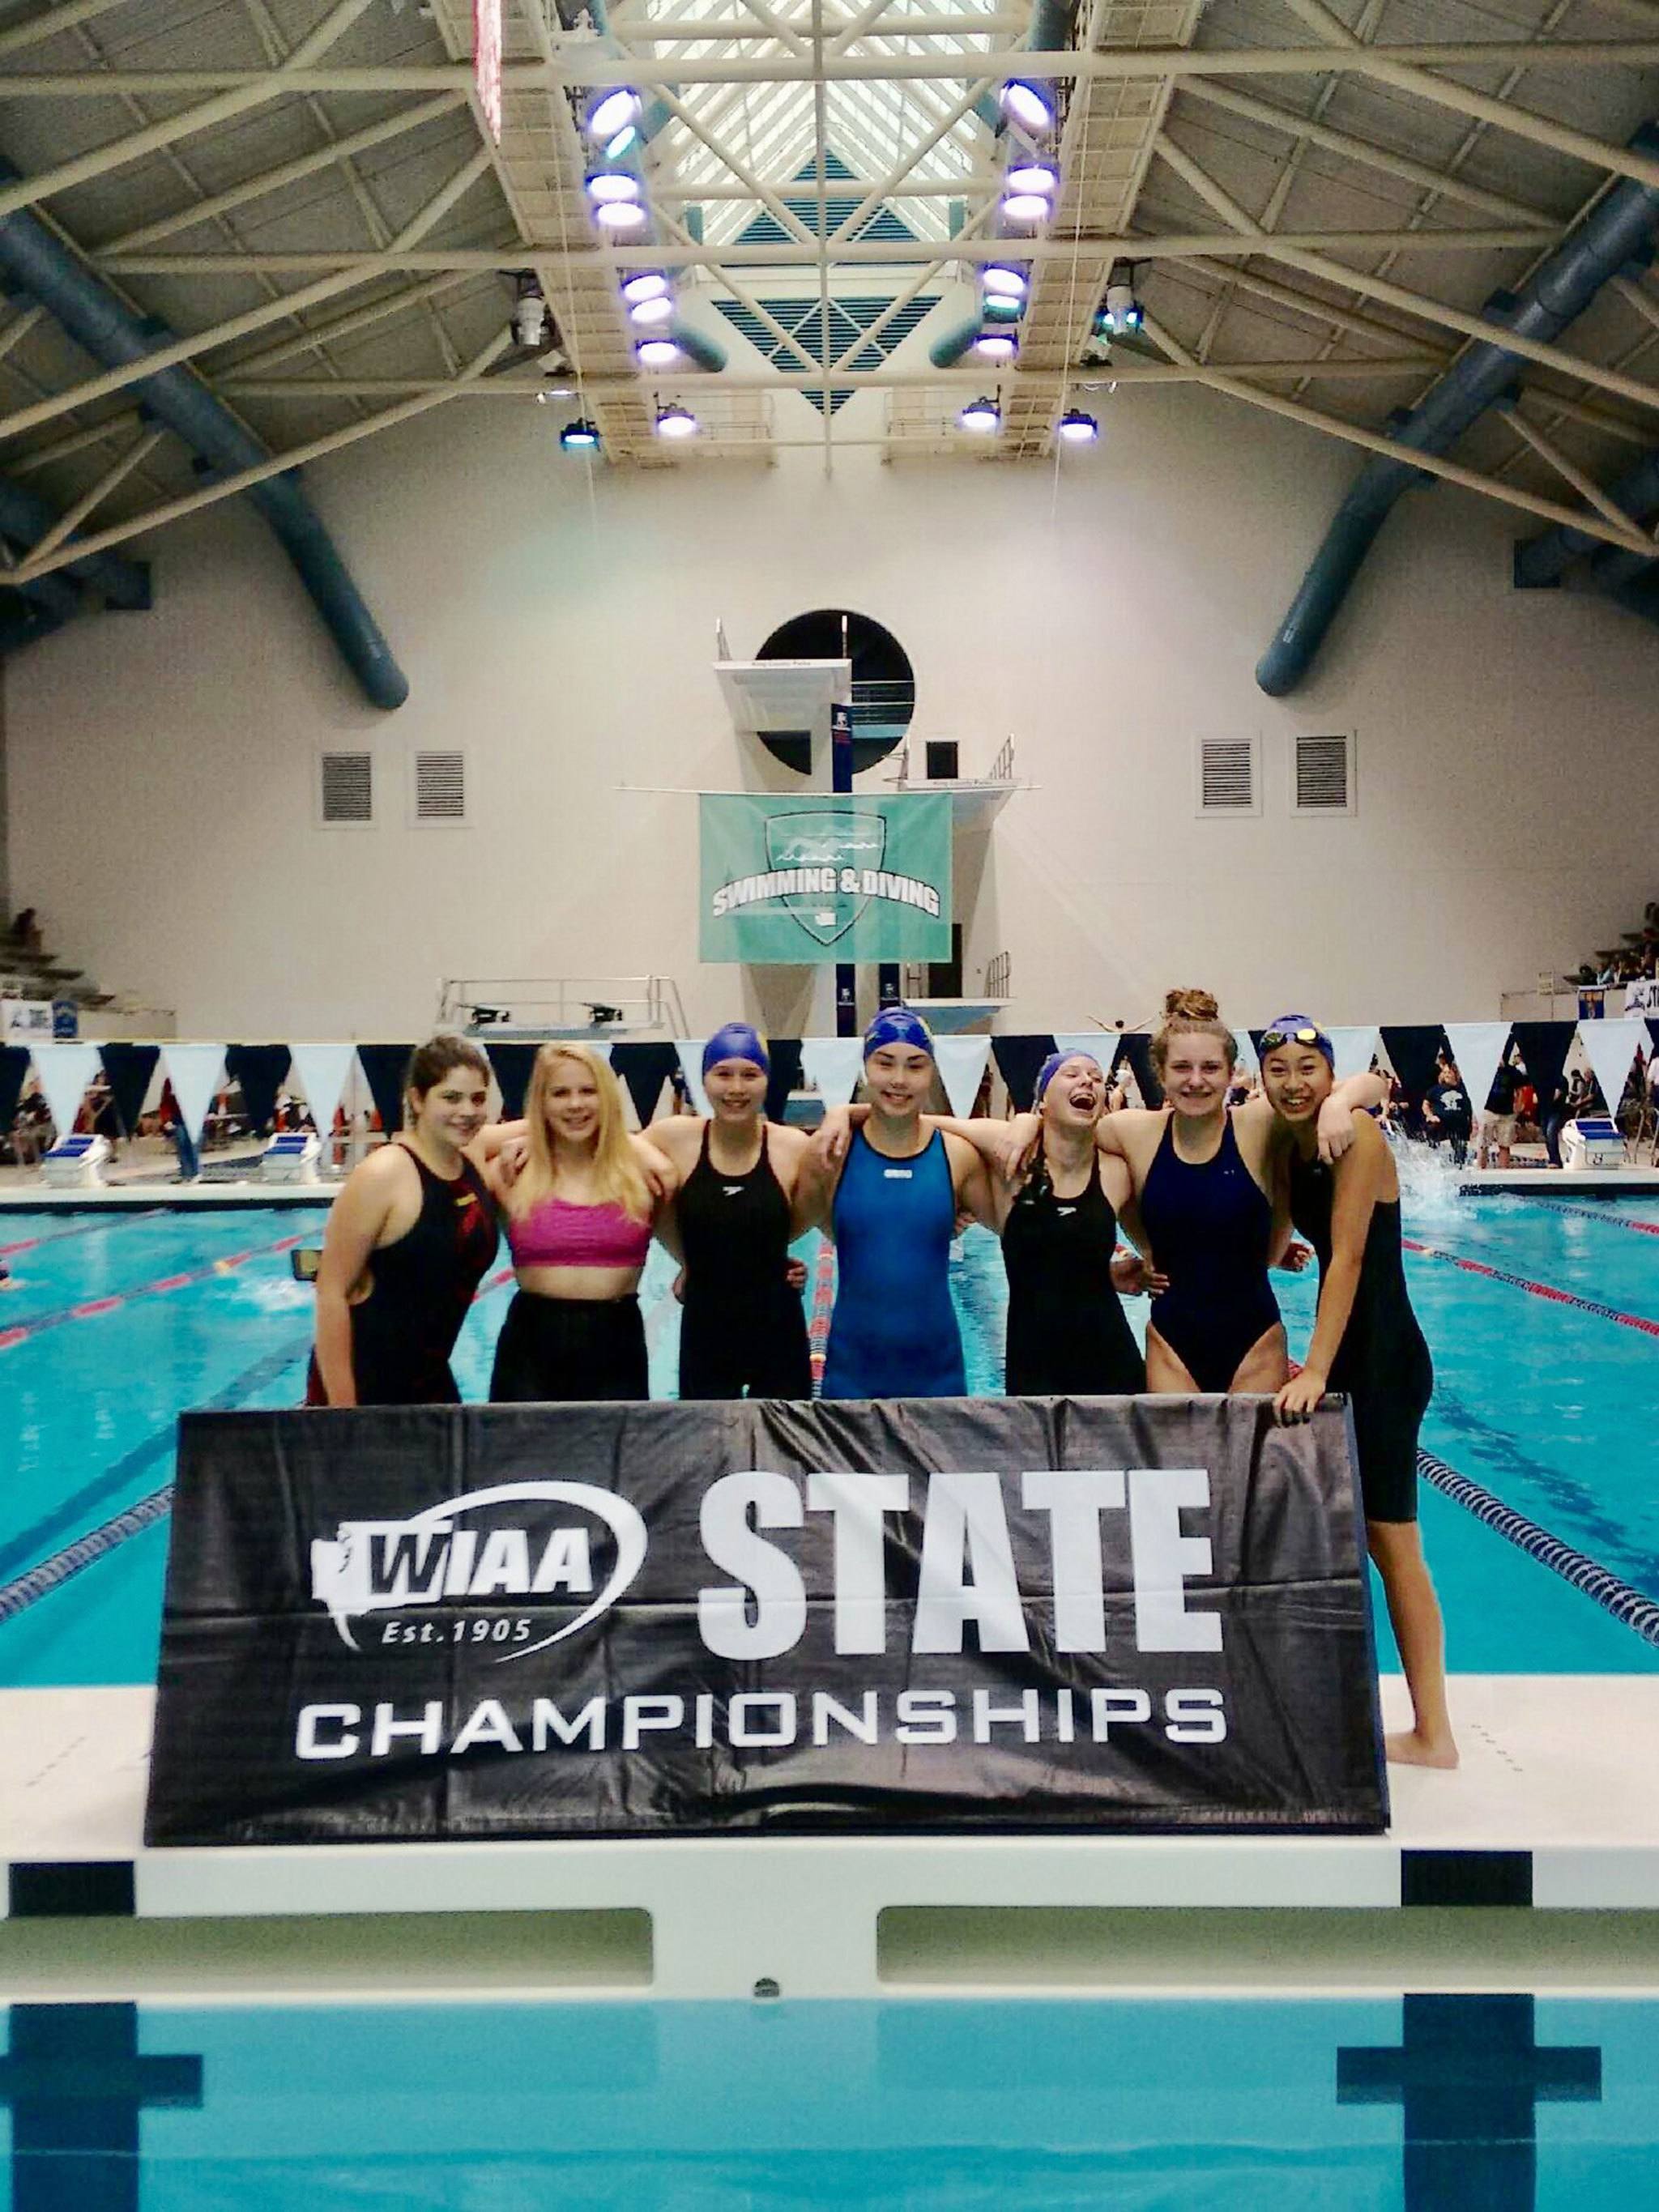 Sequim High sent seven girls to compete in the 2A state finals last weekend. They include, from left, Isa Benitez, Joie Darminio, Sonja Govertsen, Sydnee Linnane, Meguire Vander Velde, Anna Miehe and Jasmine Itti. Photo courtesy of Michelle Govertsen